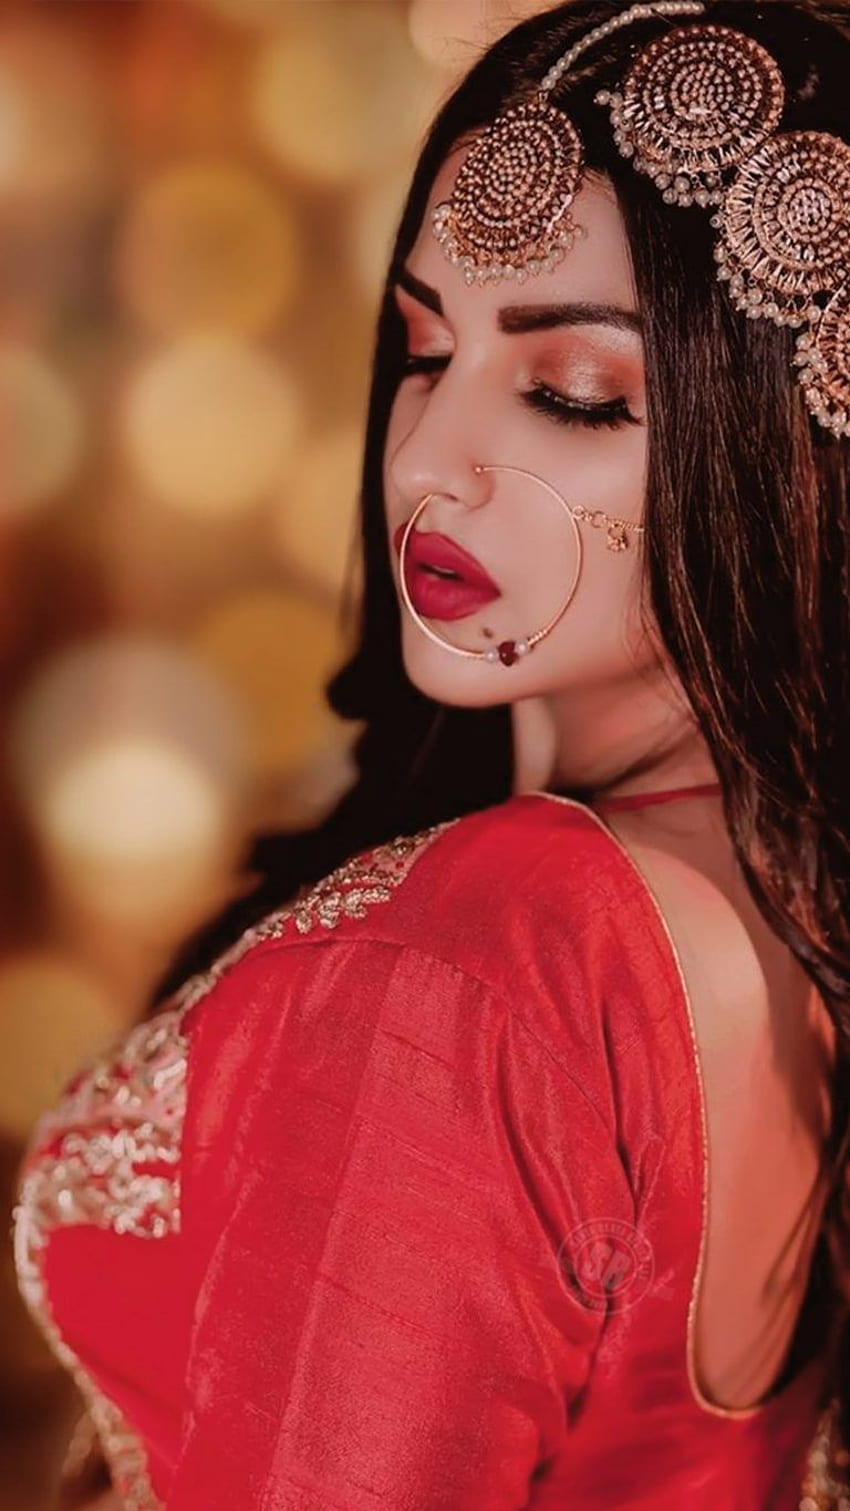 10 Most preferred shades of pink lehenga and bridal makeup that goes with it